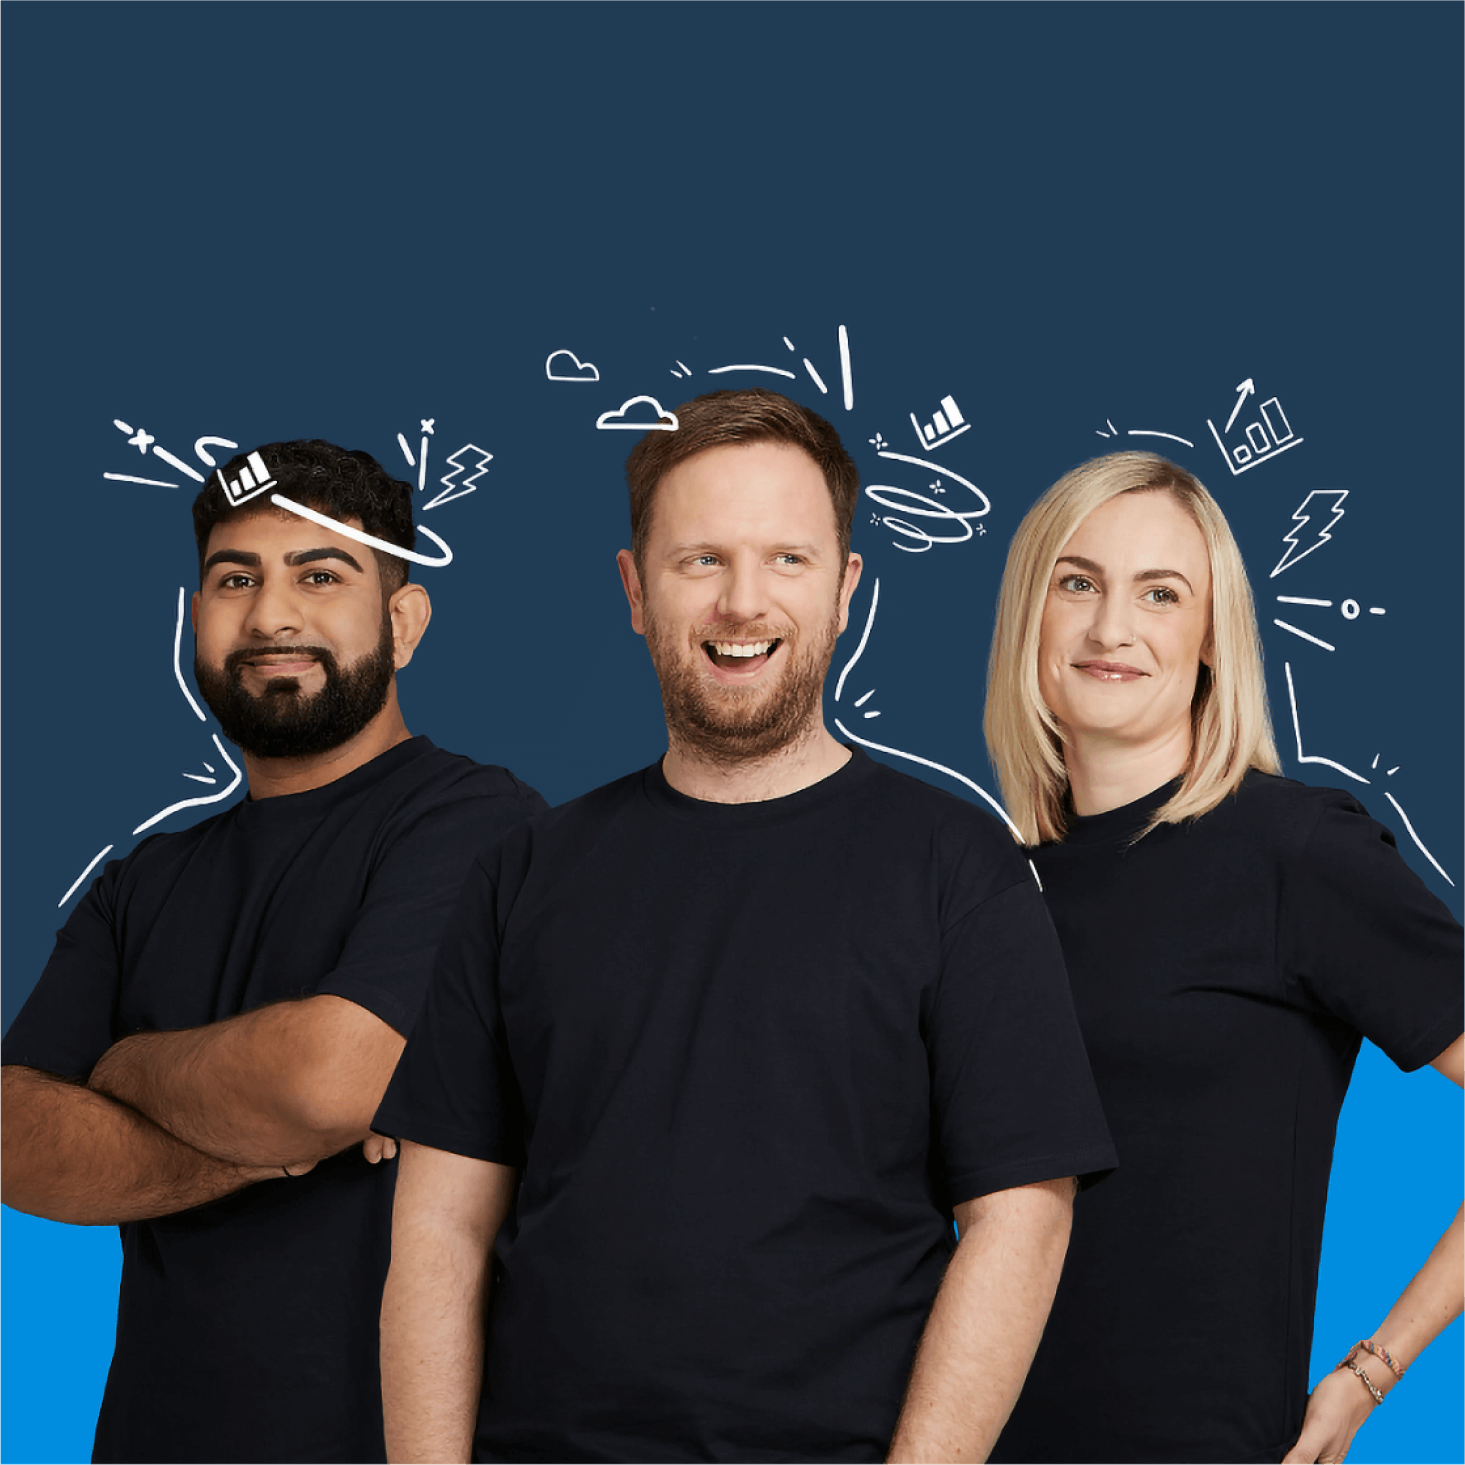 Three Xero consultants standing together smiling, with illustrations of clouds and lightning bolts around their heads. 